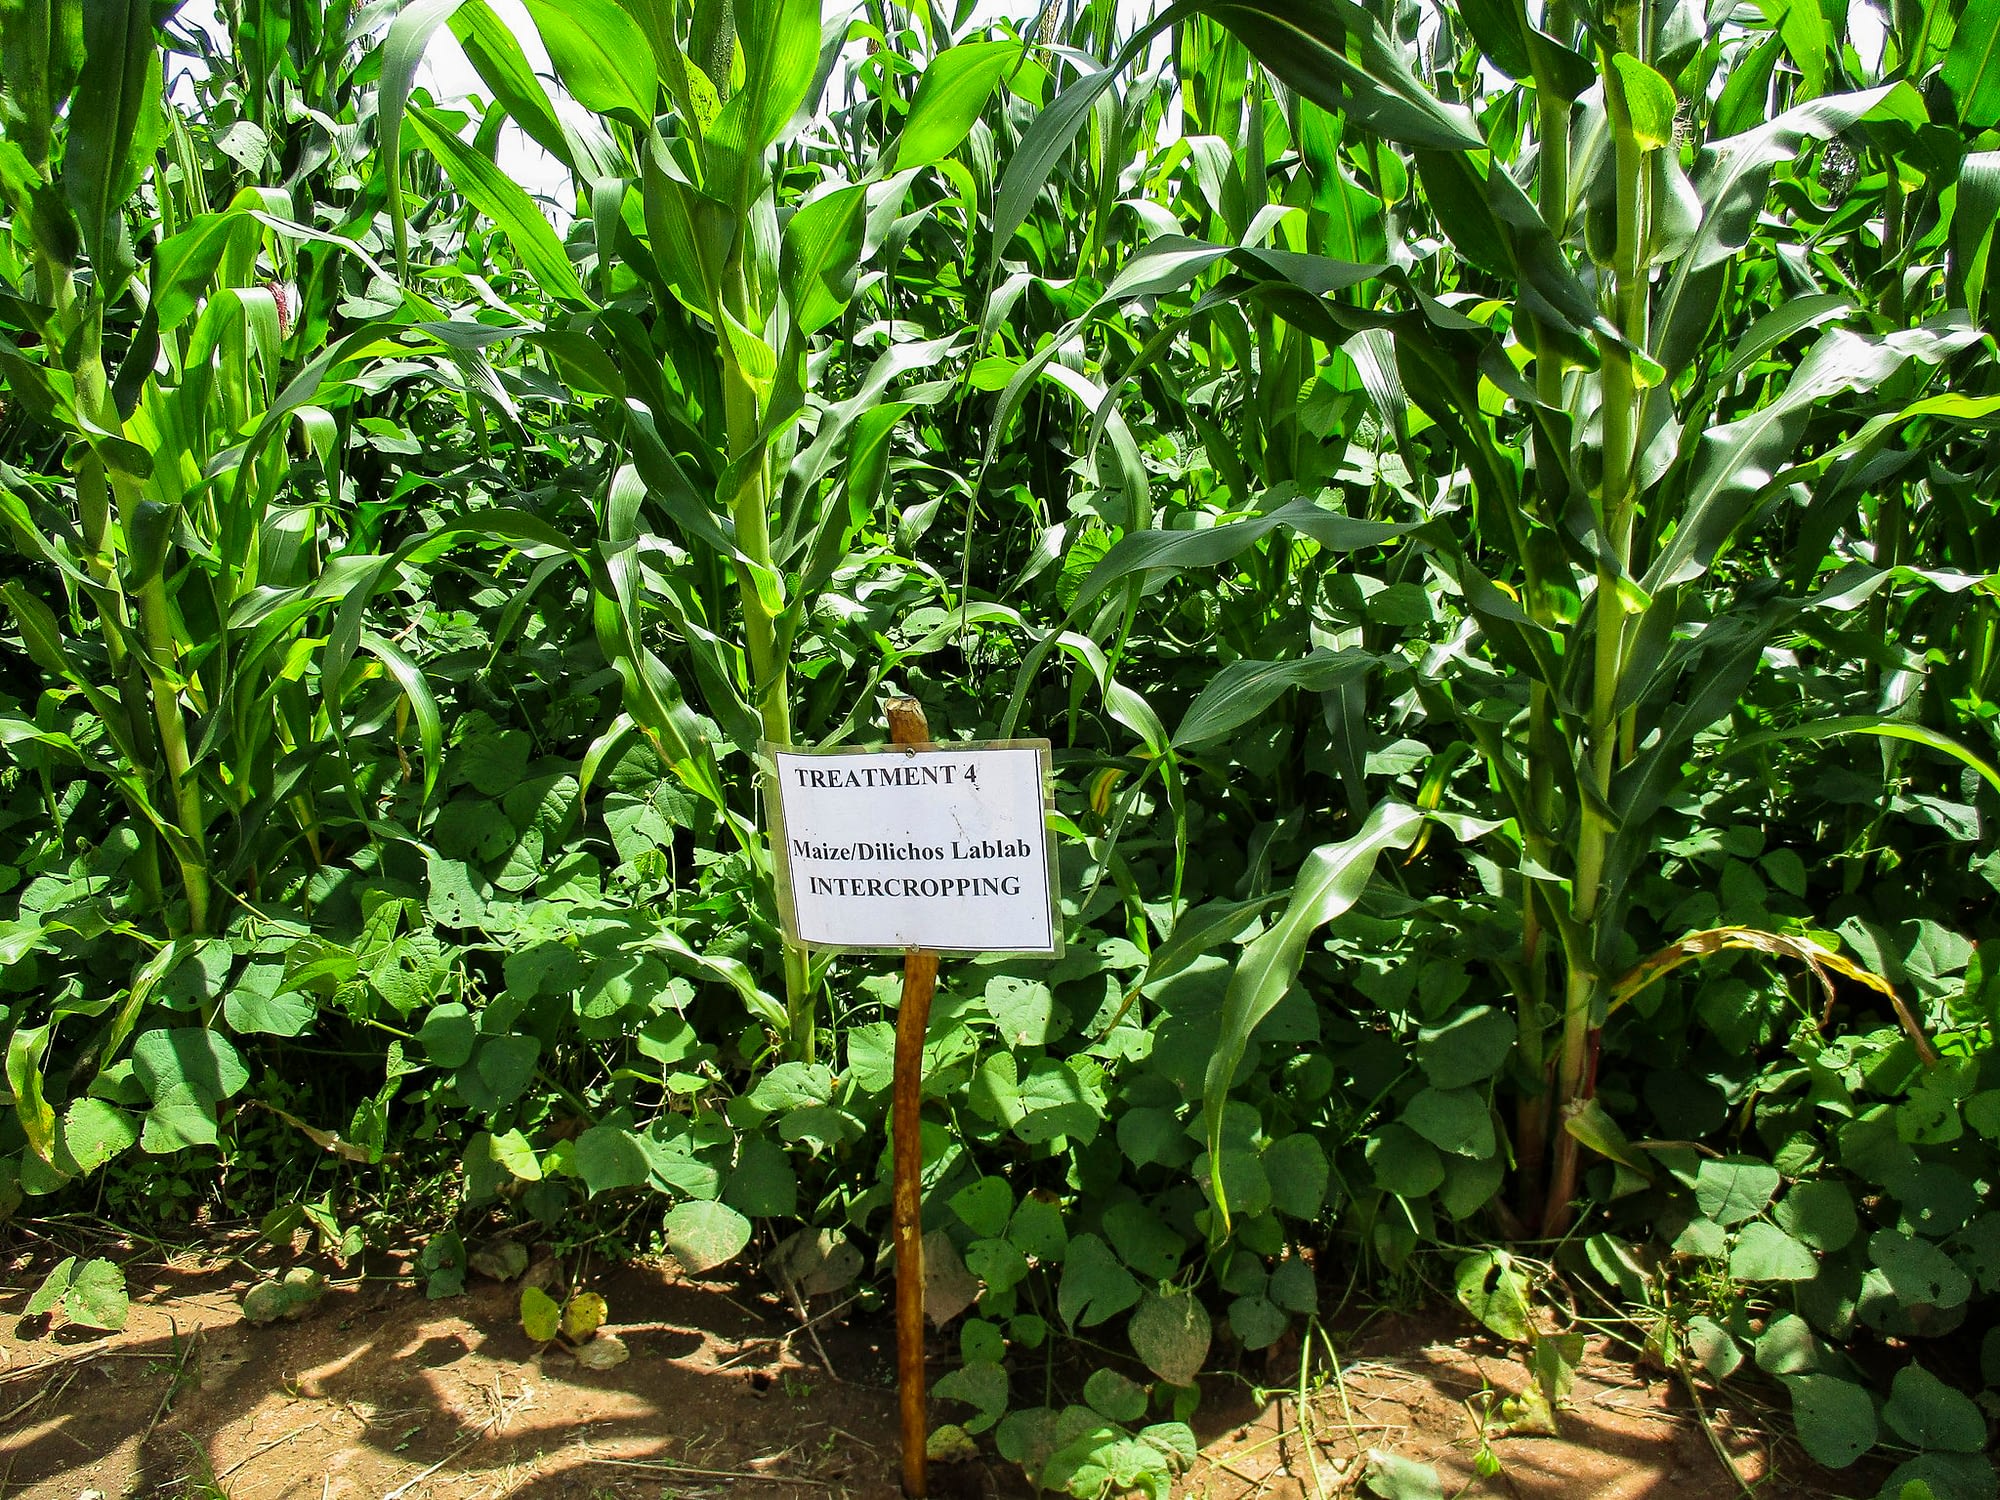 Intercropping options for mitigating fall armyworm damage. (Photo: C. Thierfelder/CIMMYT)